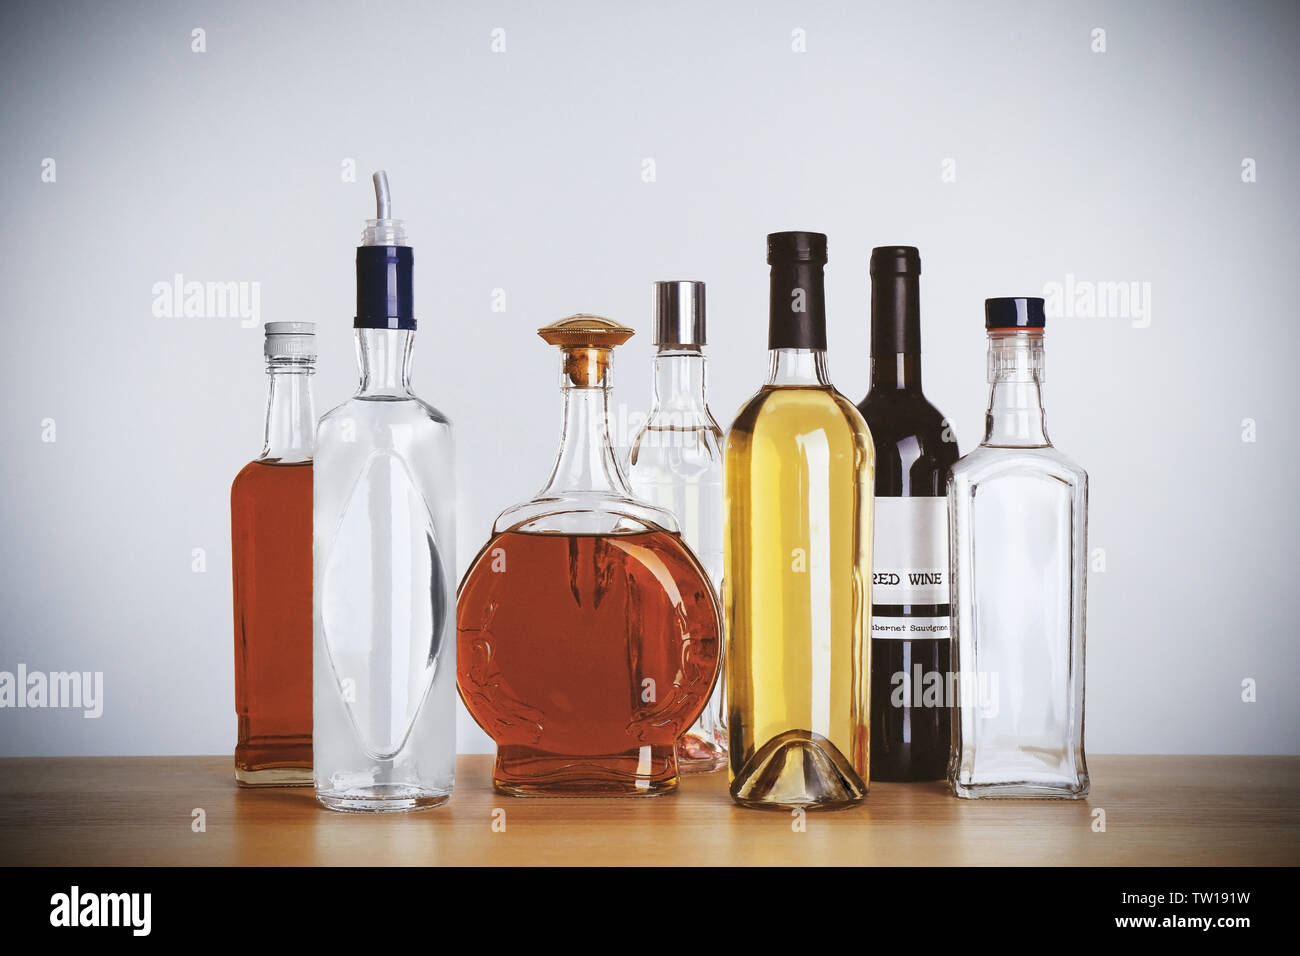 Table with different bottles of wine and spirits on light background Stock Photo